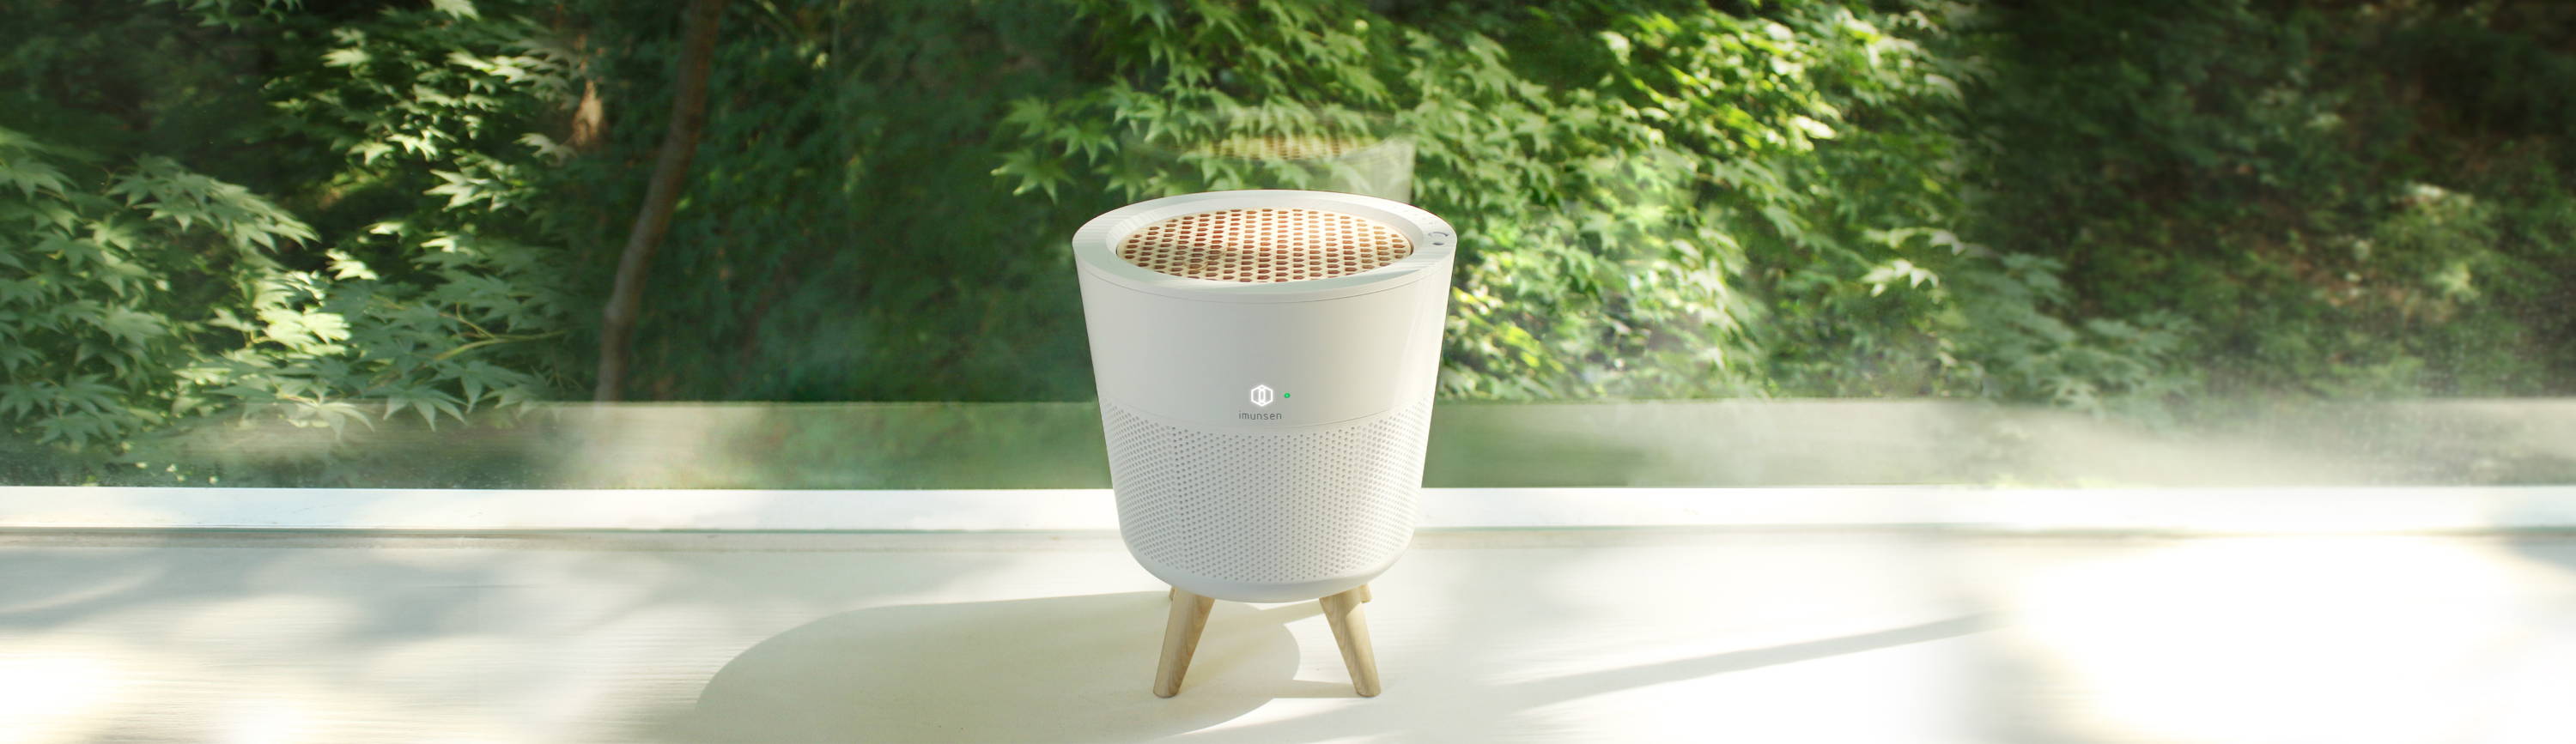 Small type Air purifier